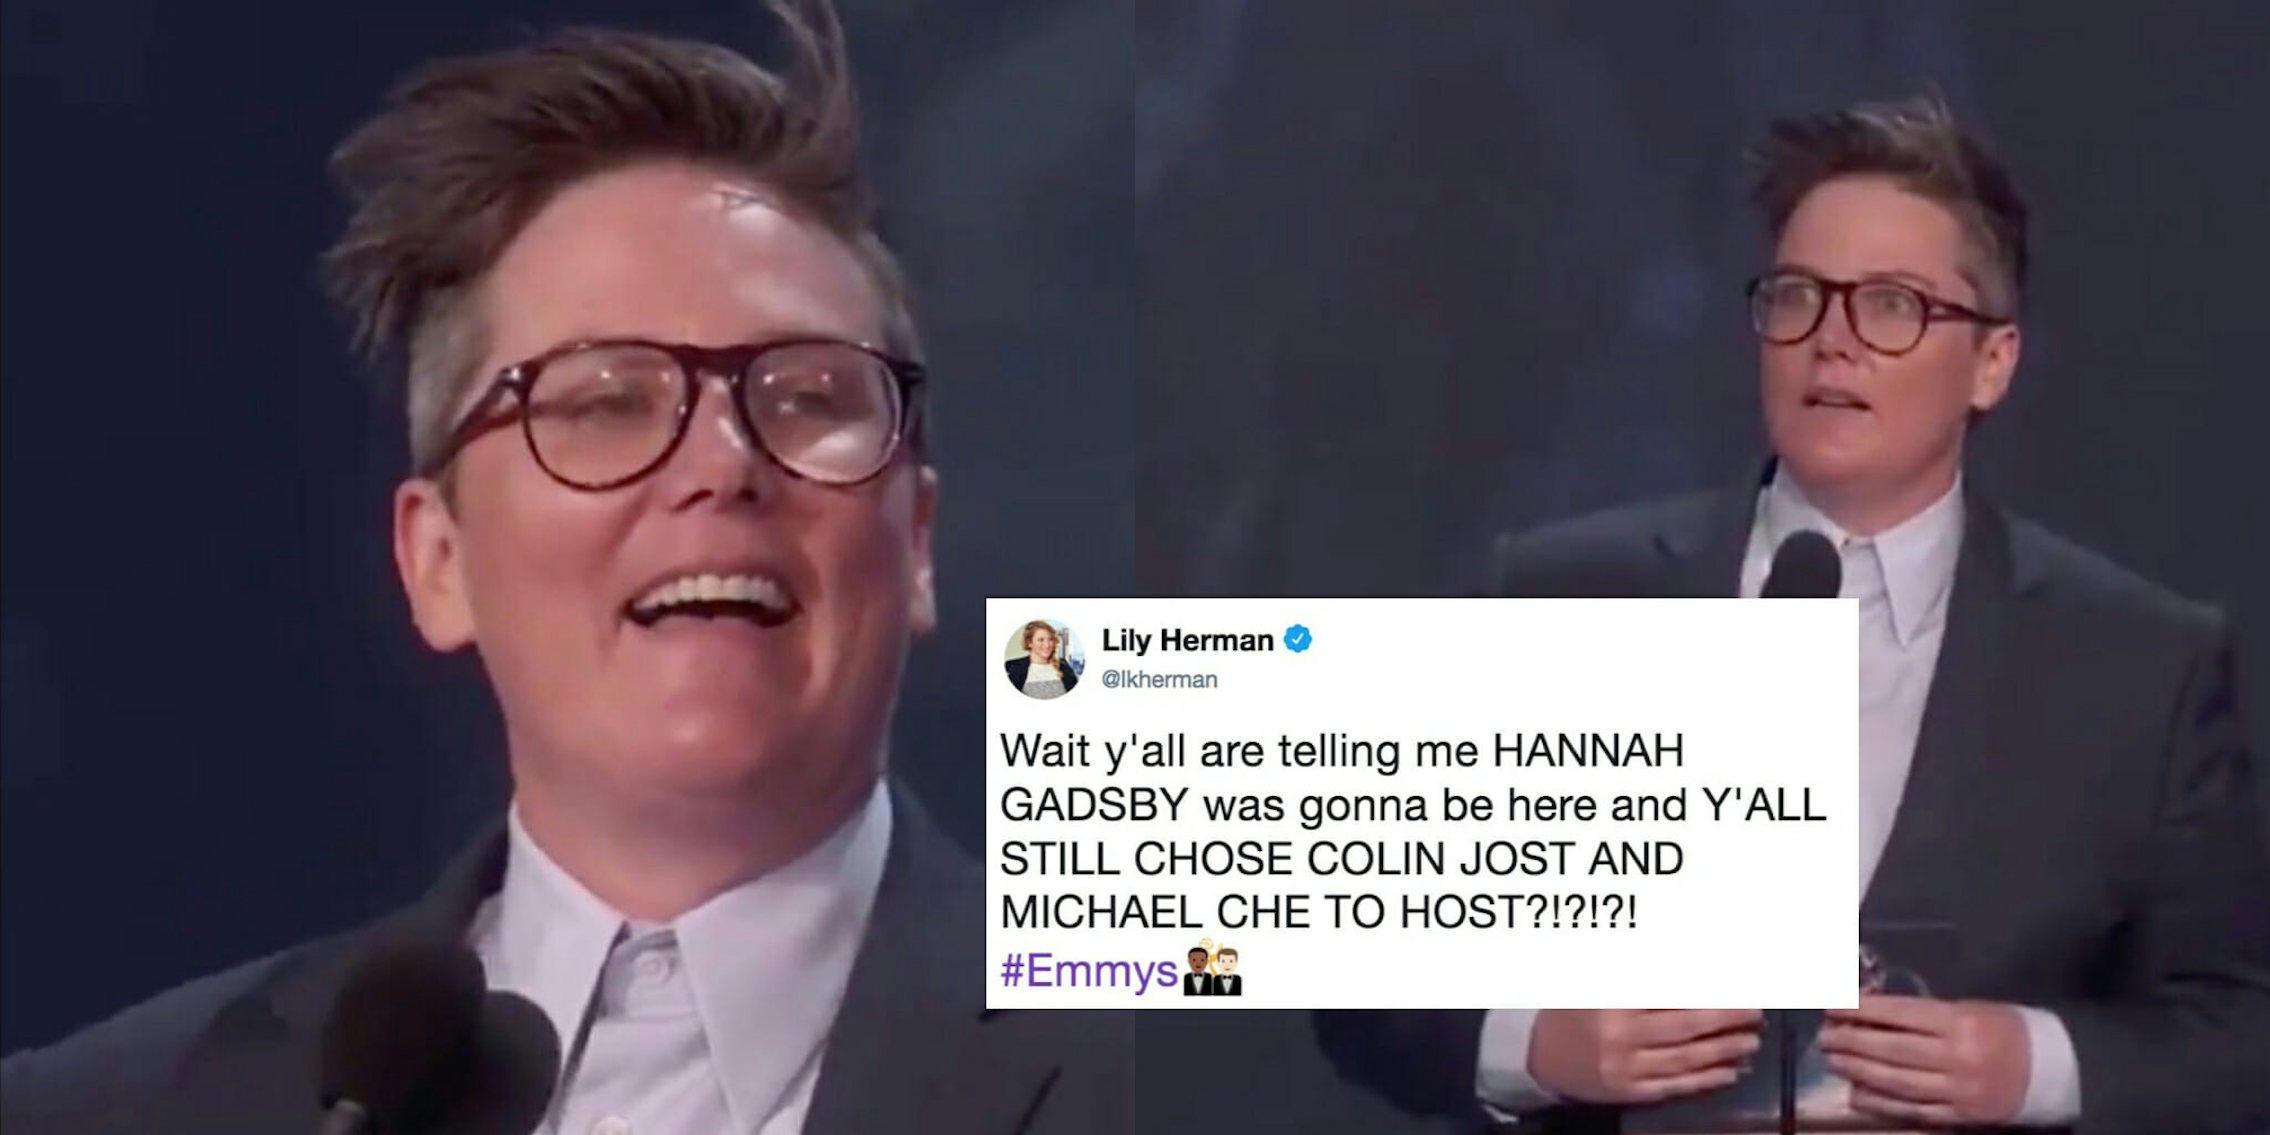 Hannah Gadsby presenting an award at the Emmys.